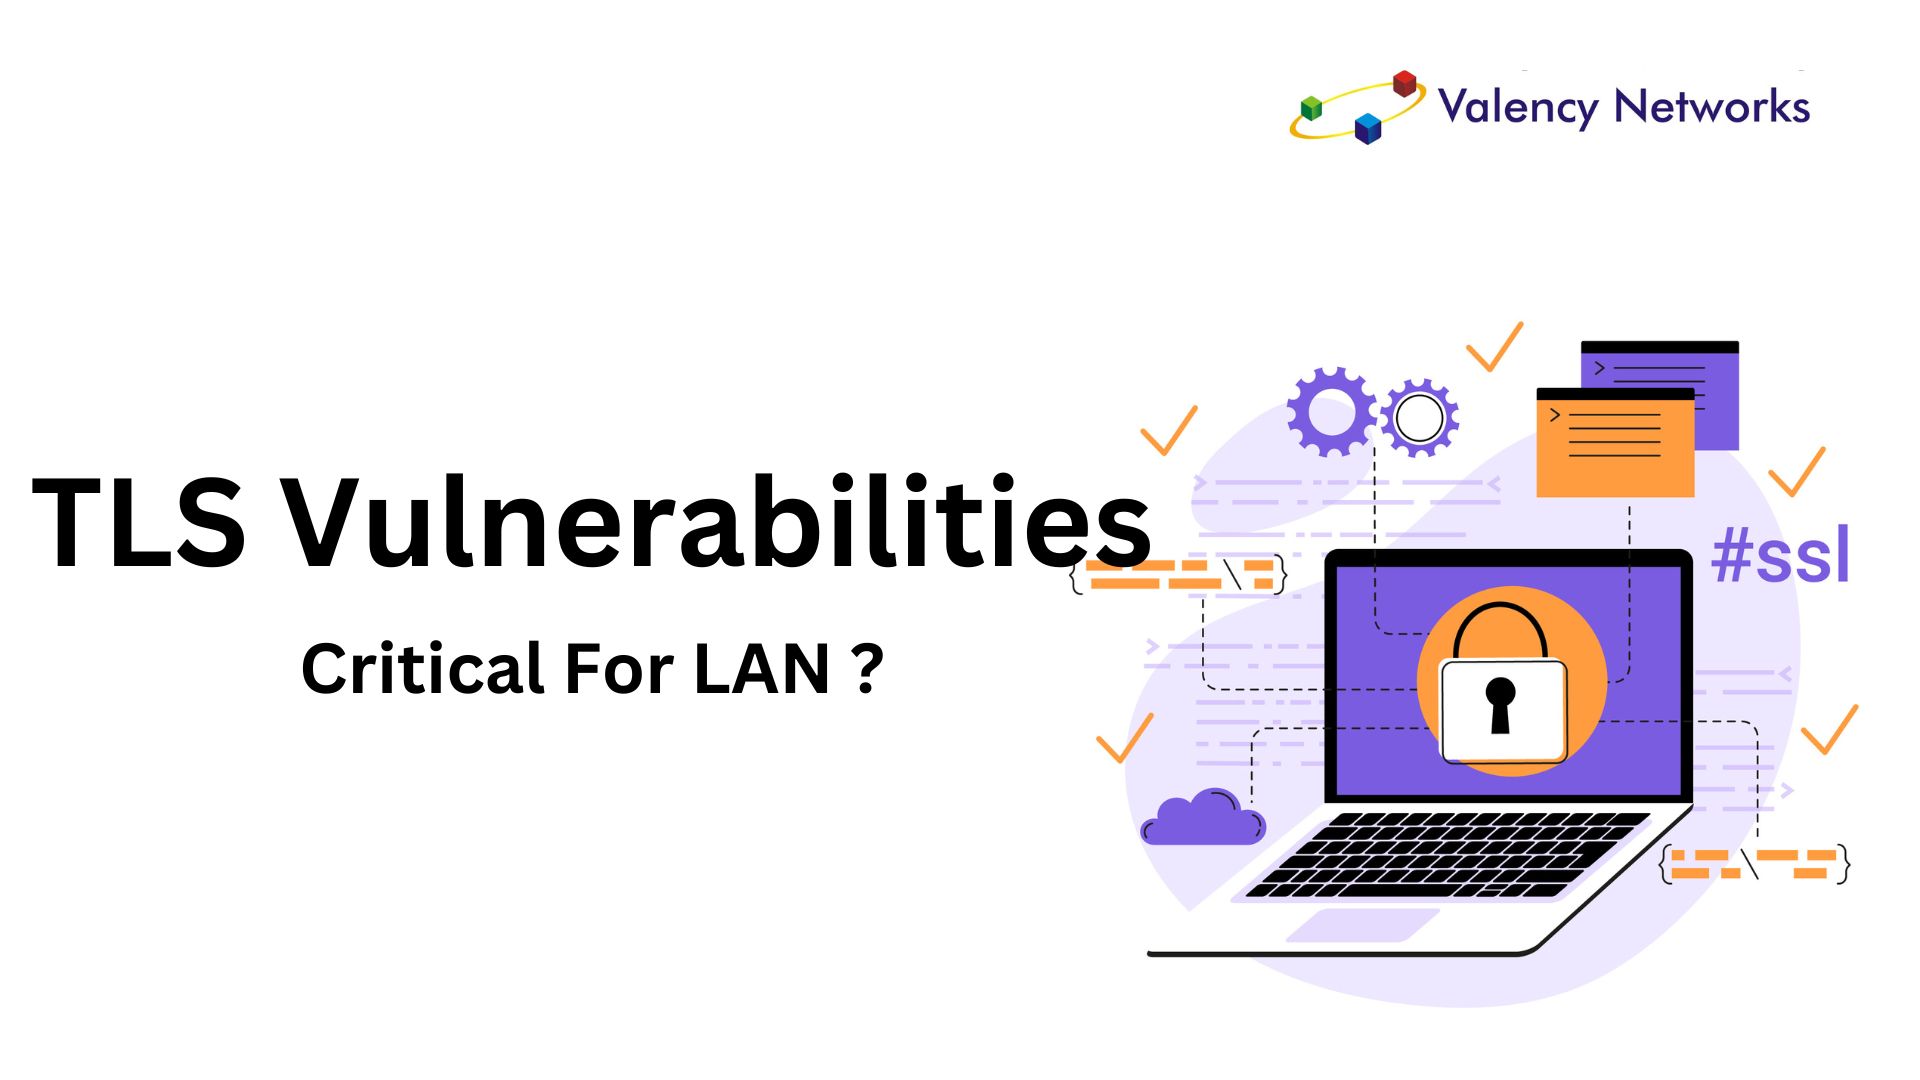 Are TLS vulnerabilities considered critical for internal network